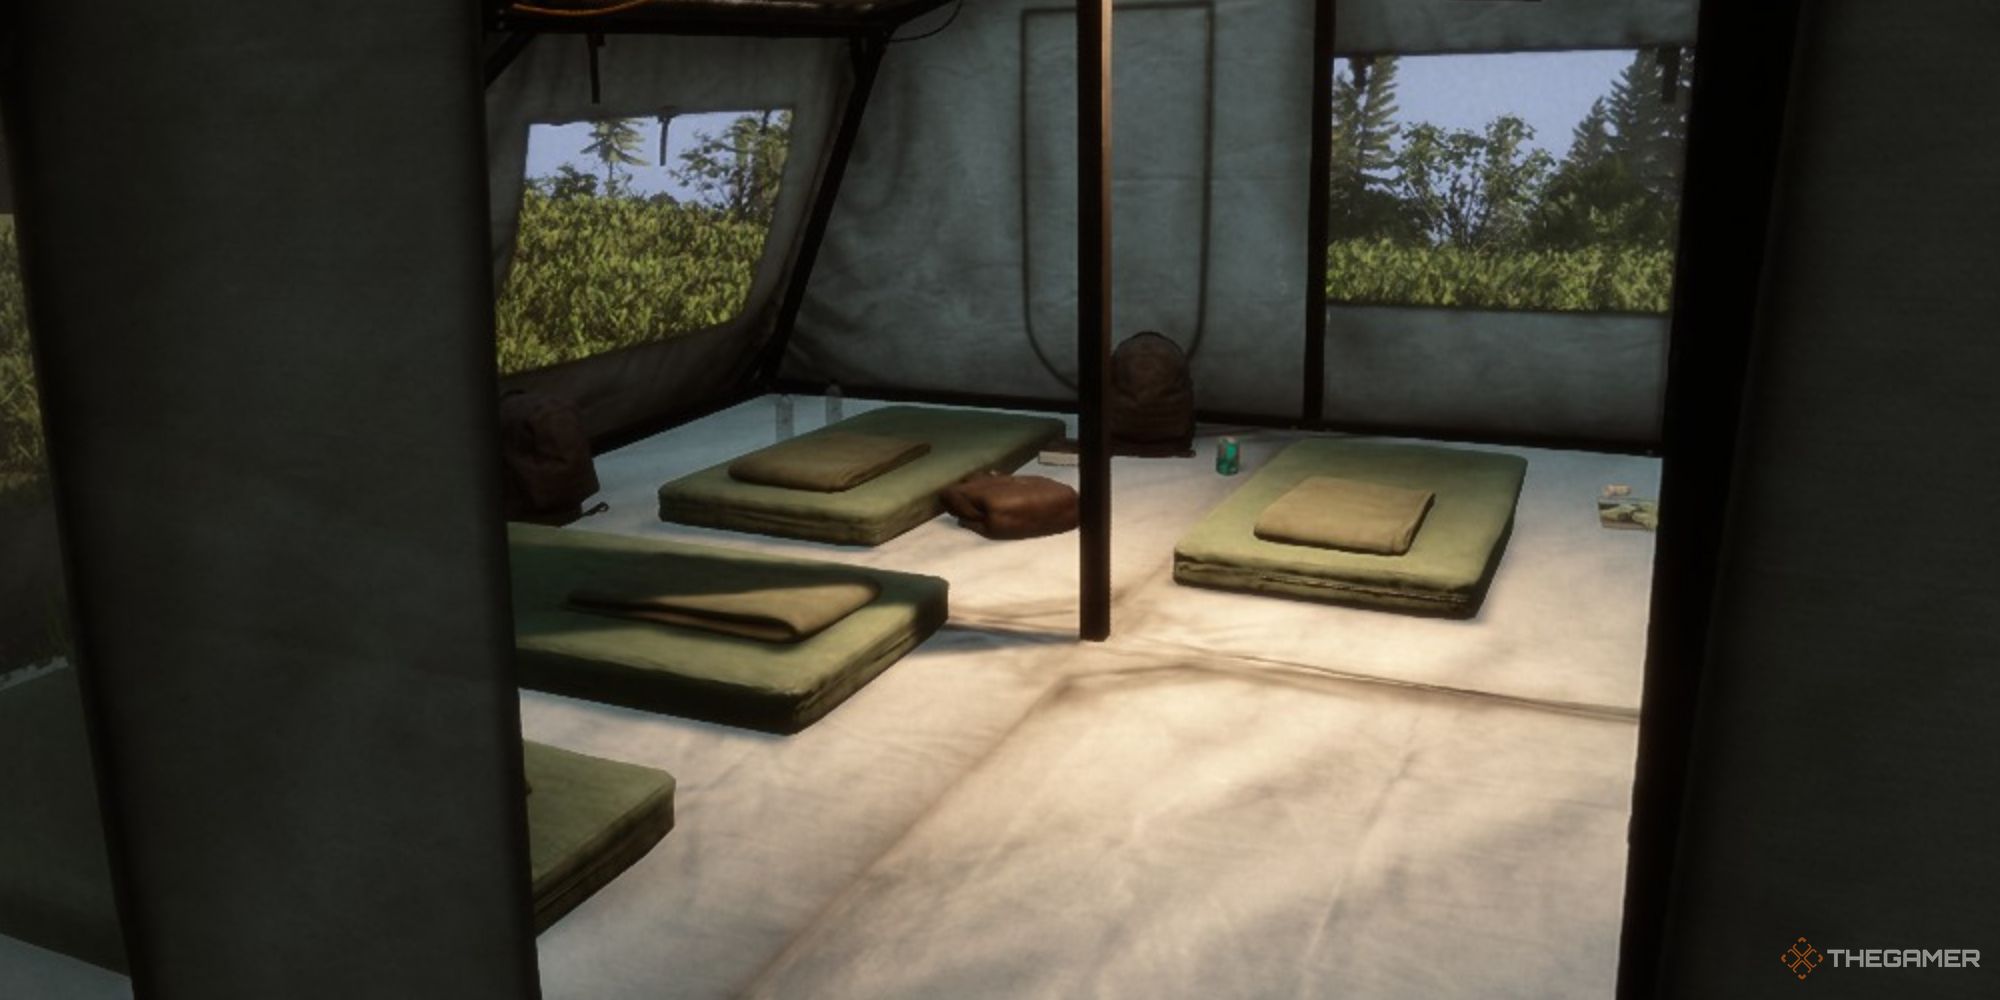 A screenshot from Sons of the Forest showing the interior of a large tent through a door, with a puffy red jacket being seen near a small green cot at the rear of the tent.